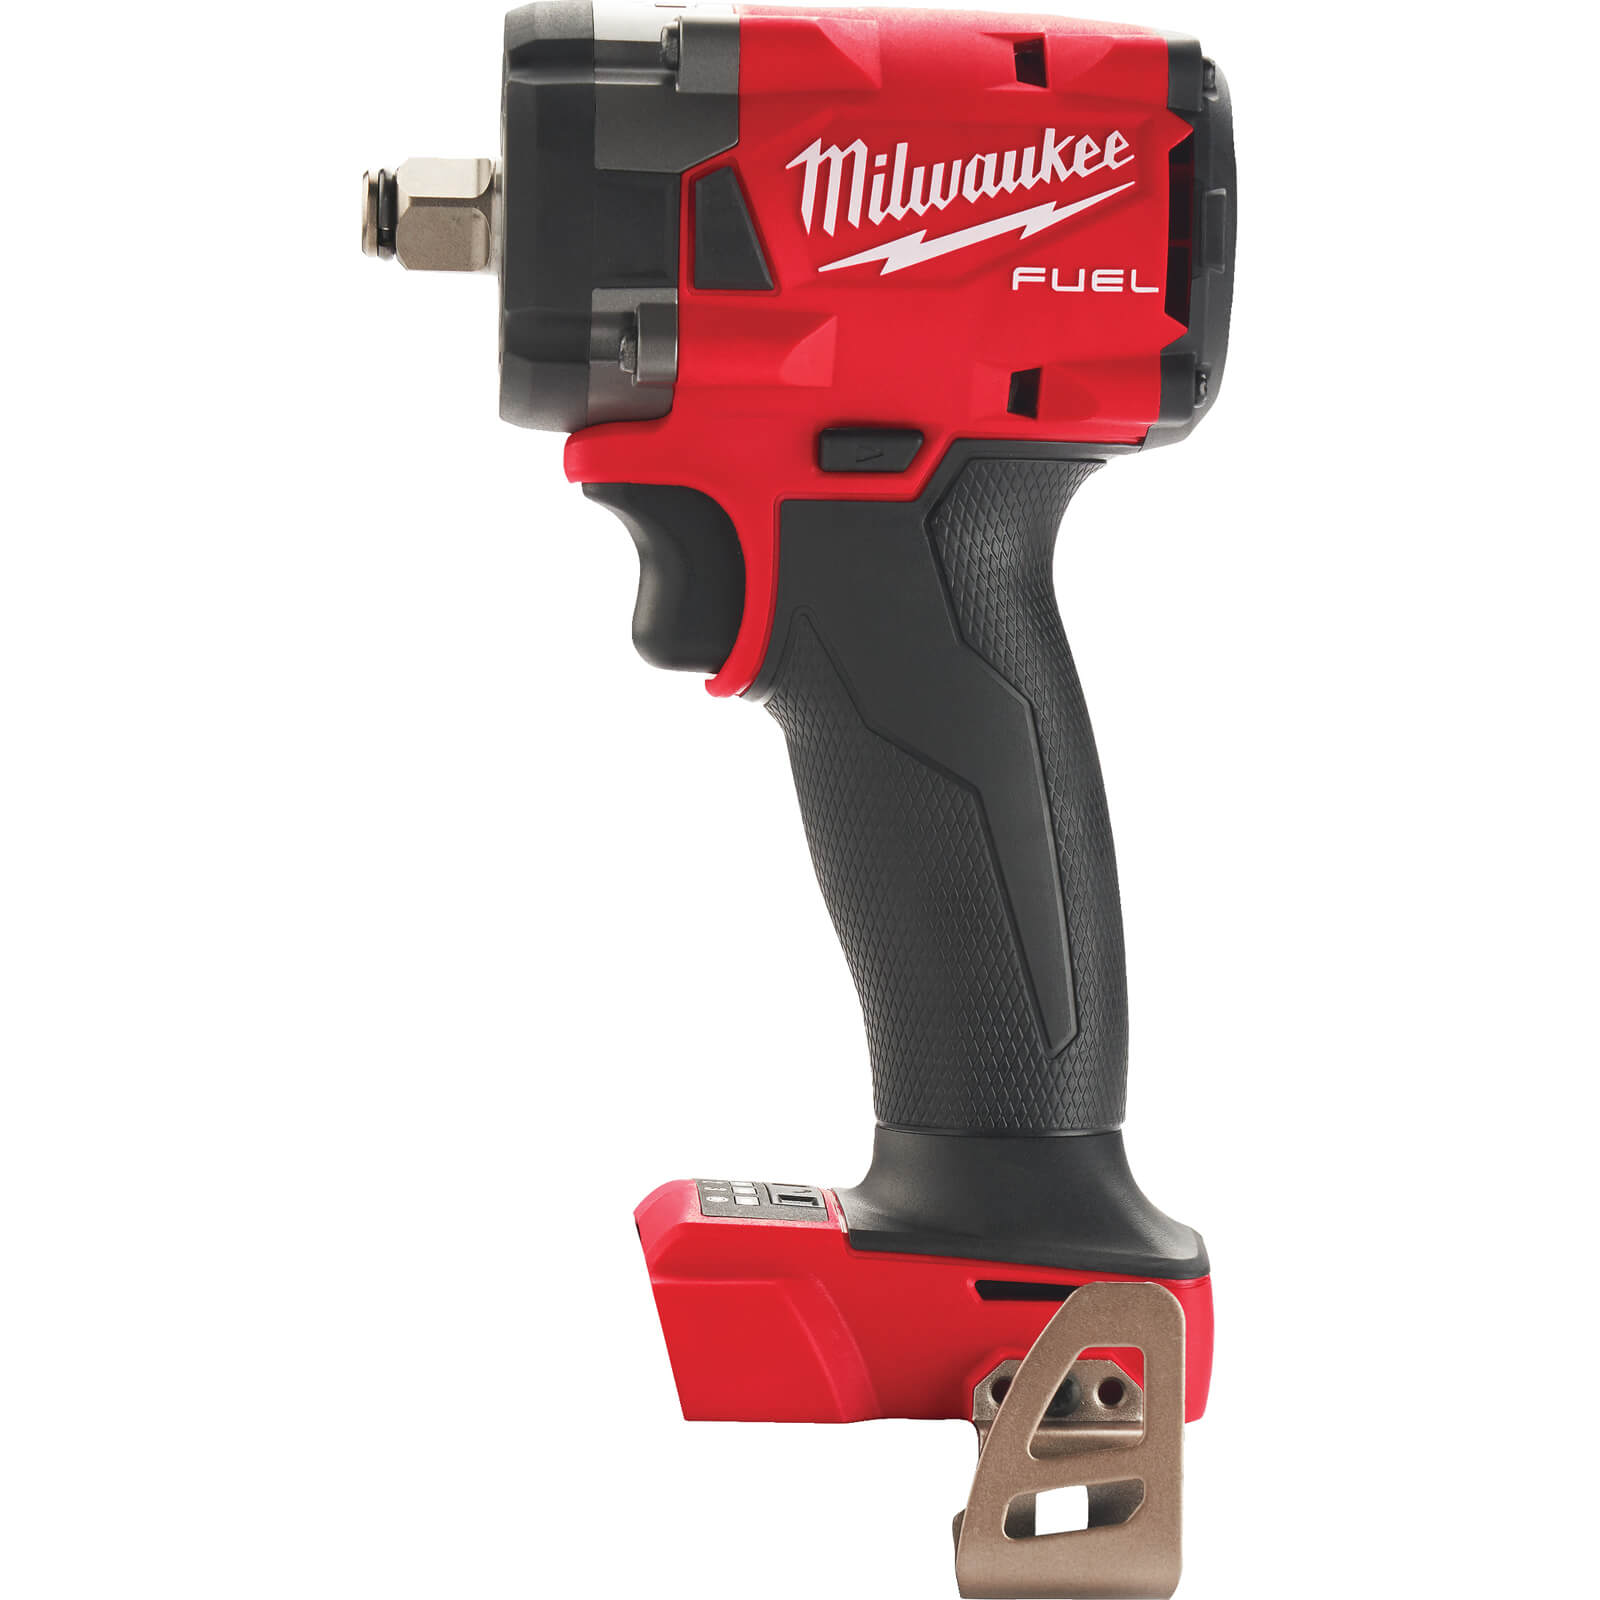 Image of Milwaukee M18 FIW2F38 Fuel 18v Cordless Brushless 3/8" Drive Impact Wrench No Batteries No Charger Case